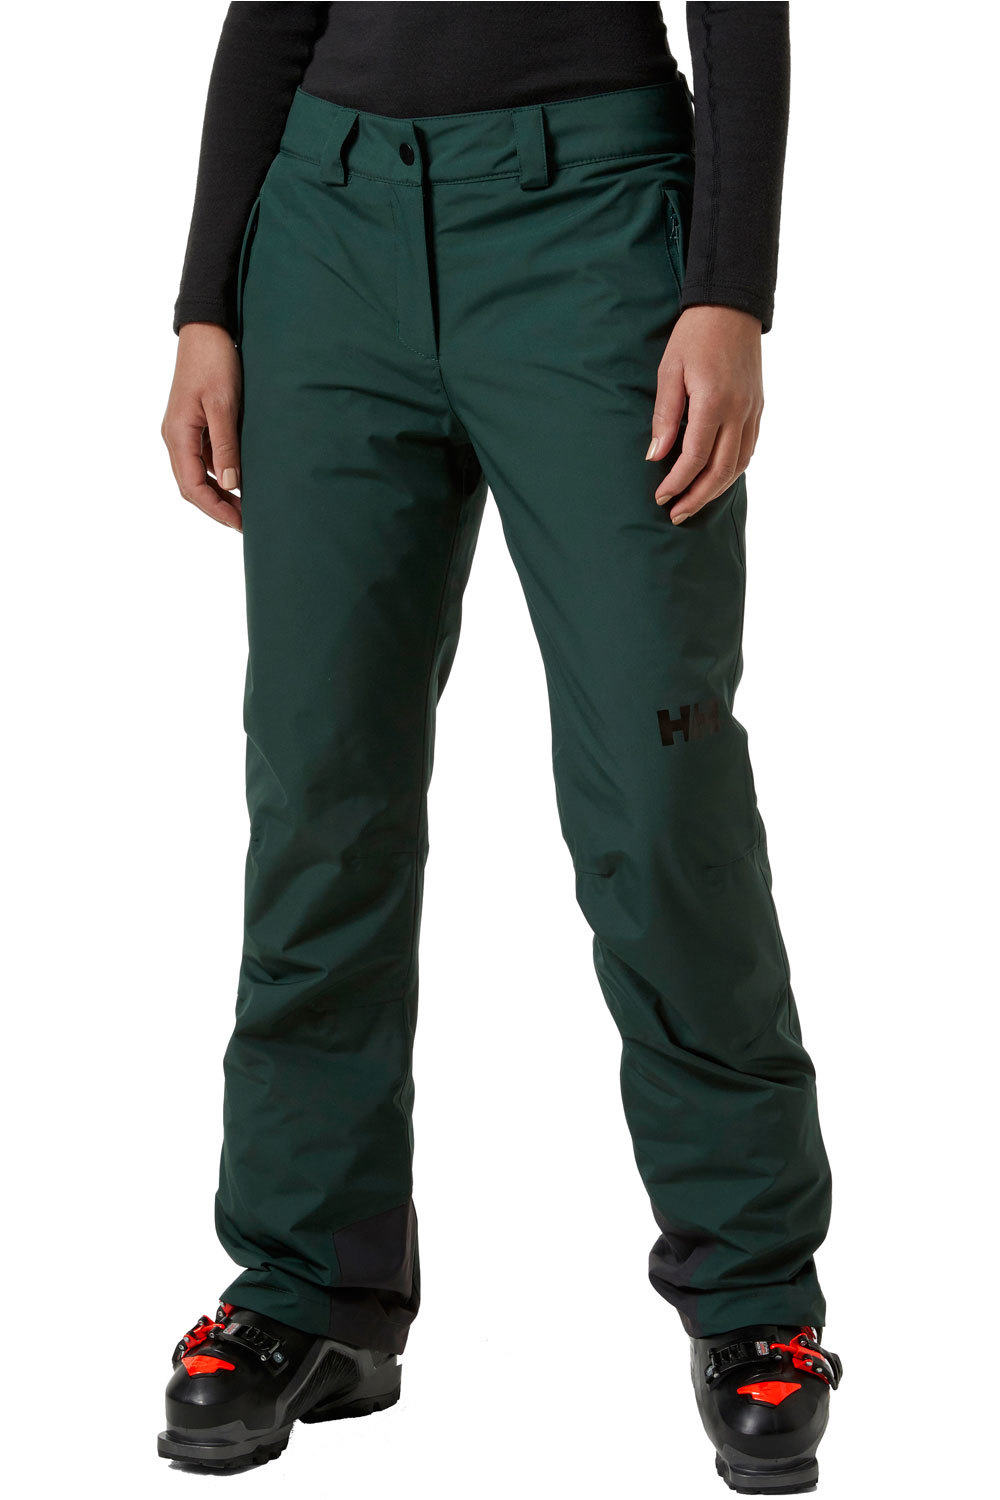 Helly Hansen pantalones esquí mujer W BLIZZARD INSULATED PANT vista frontal